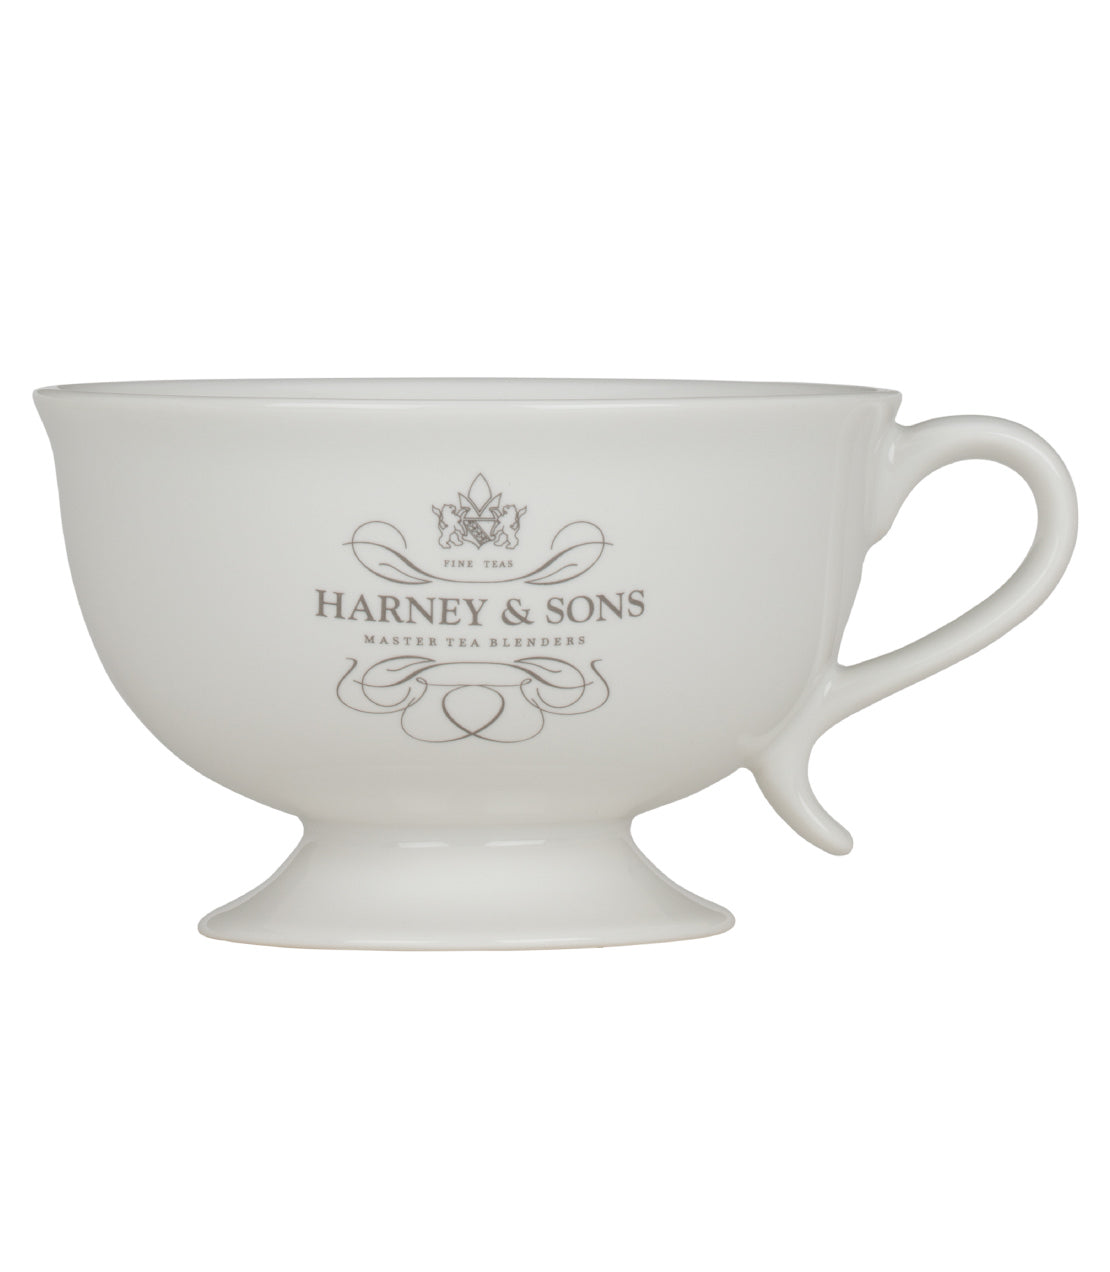 Harney & Sons Display Rack - Decorative Wire, for 4 Premium Teabag Box -  Harney & Sons Fine Teas